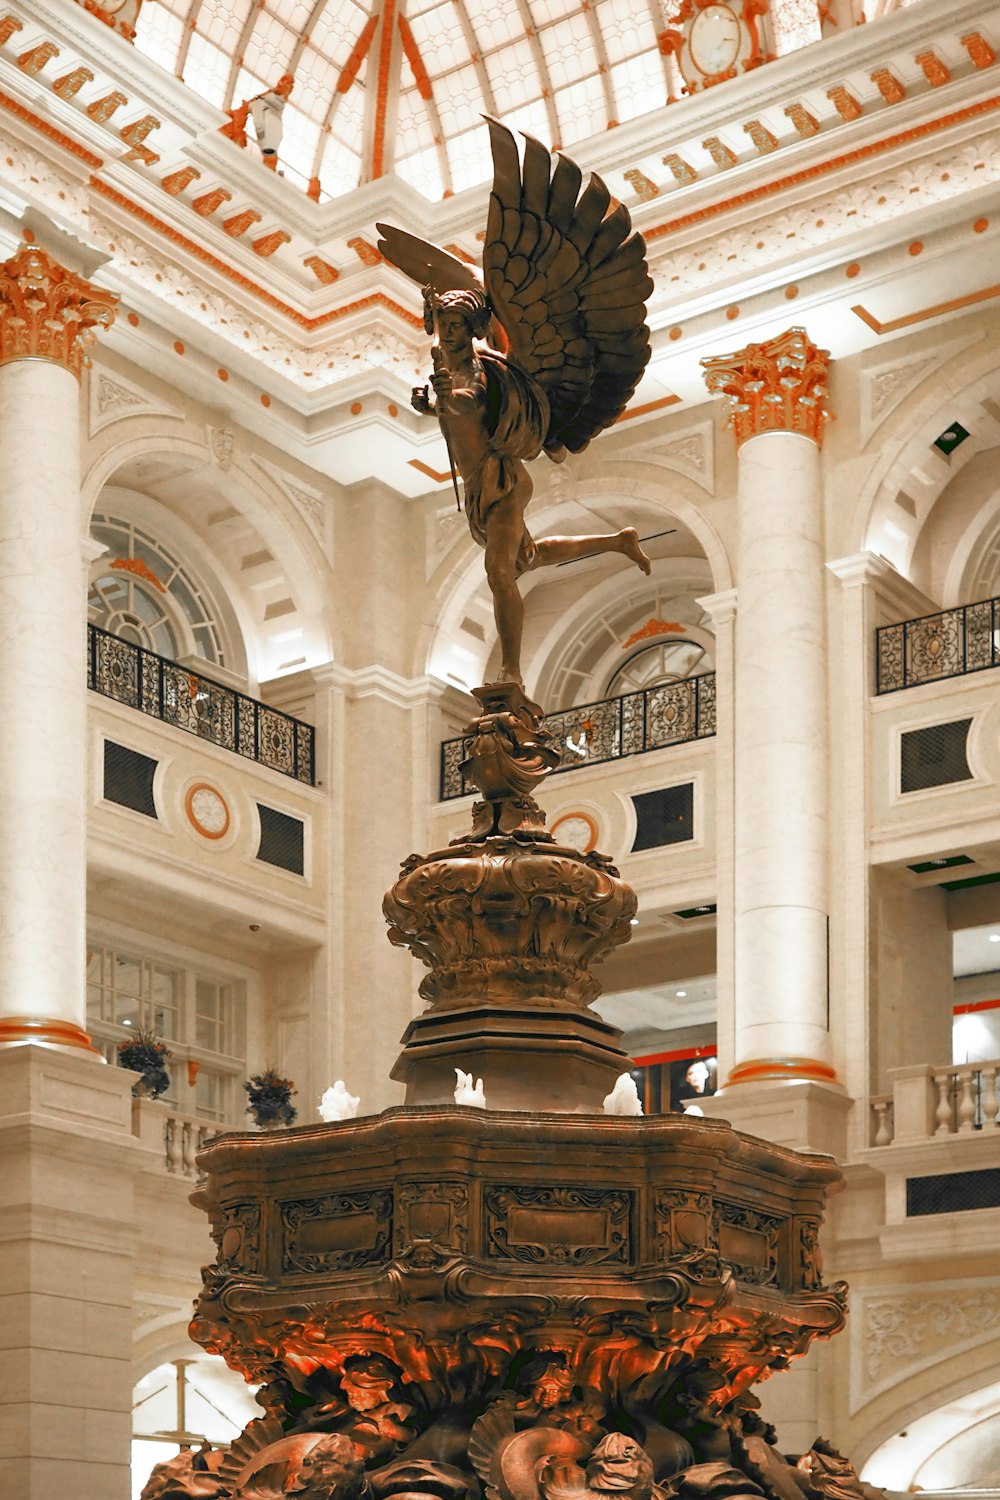 a statue of a bird on top of a fountain in a building